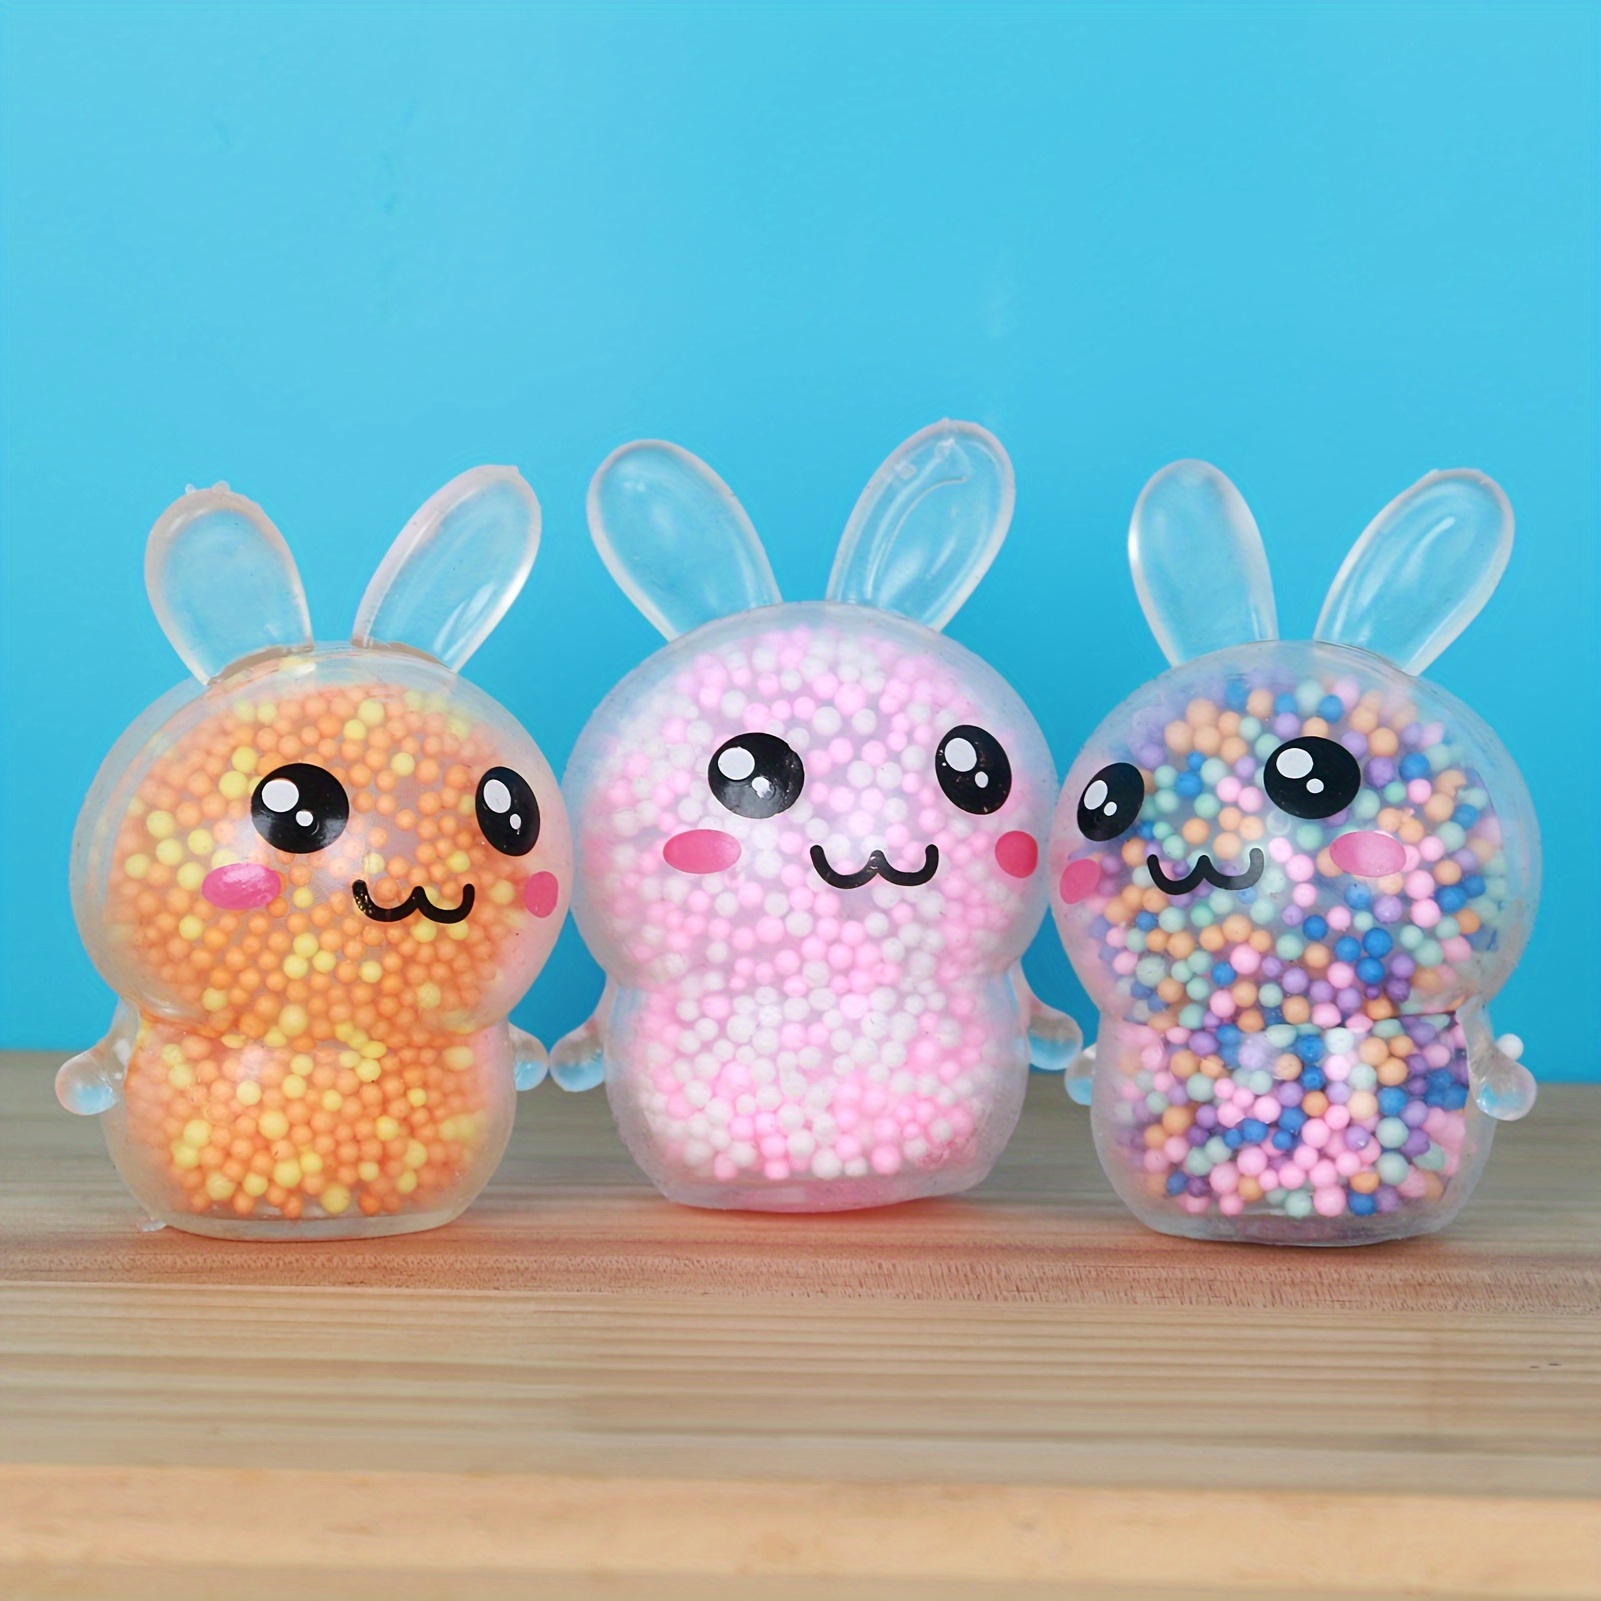 

6pcs Colorful Easter Bunny Bear Stress Balls - Perfect Kids Easter Basket Stuffers & Party Favors!